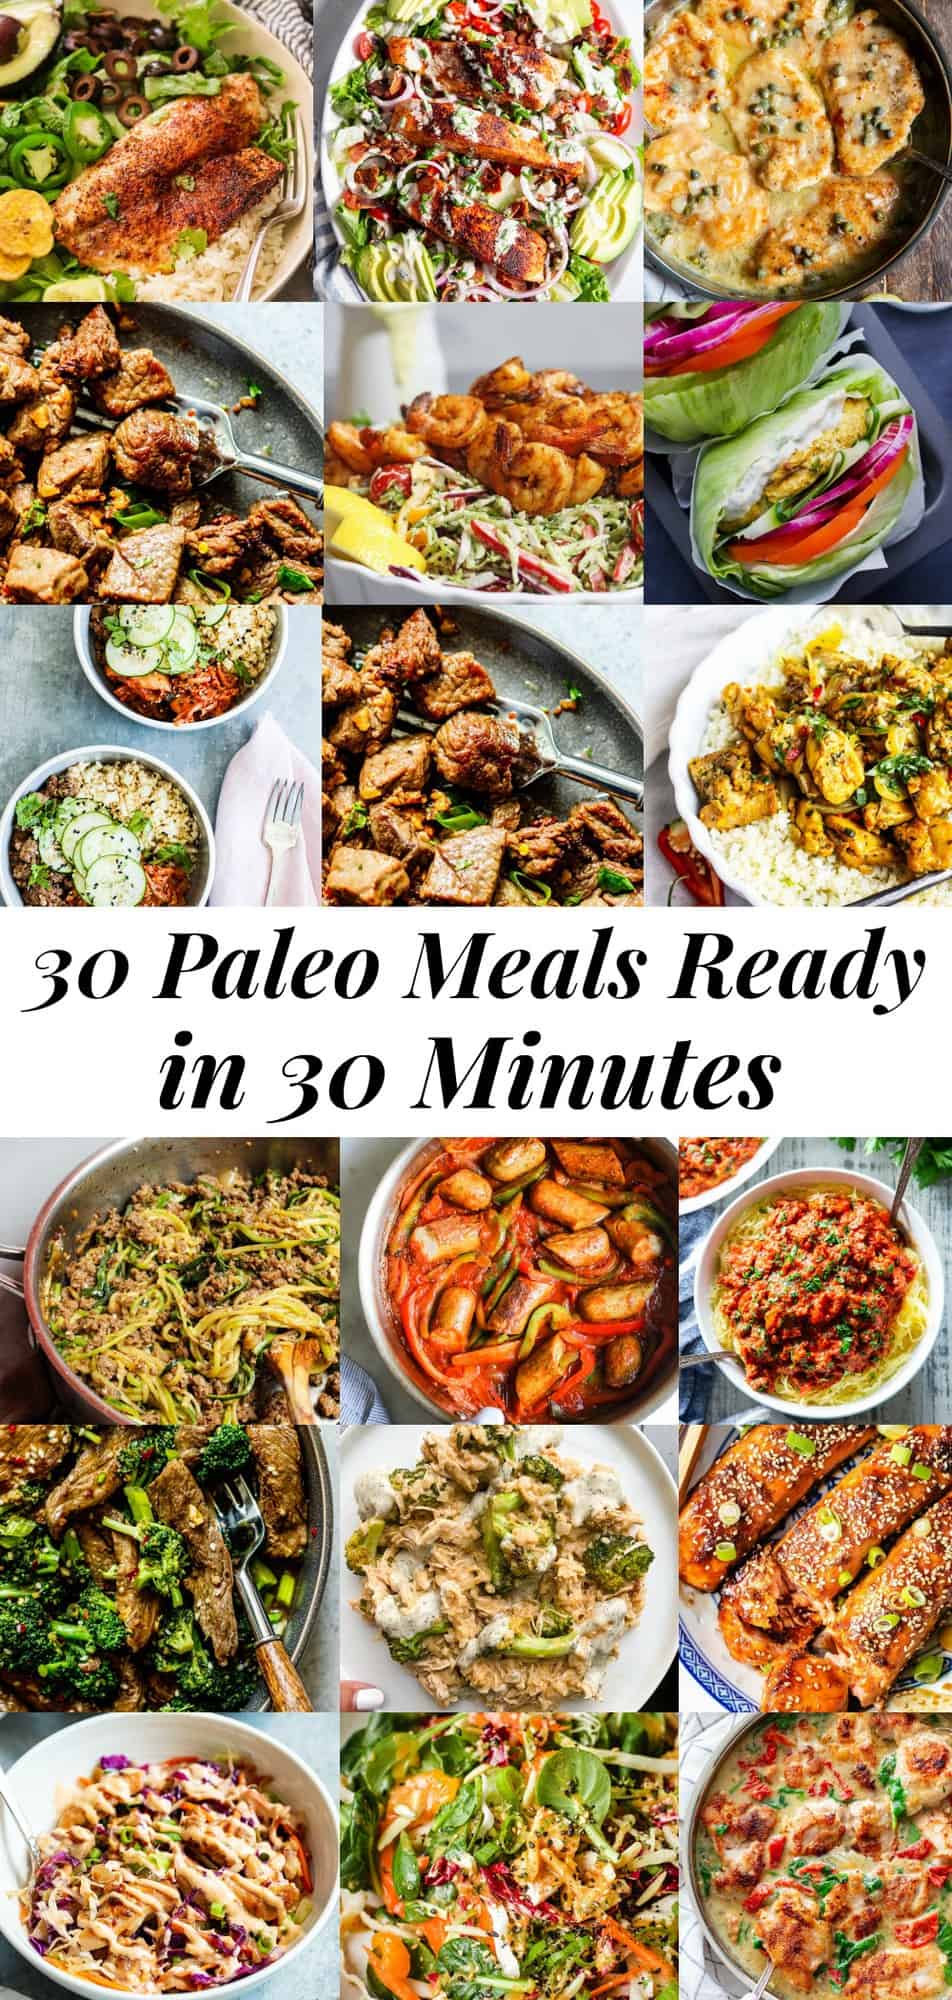 These 30 paleo meals are all ready in 30 minutes or less.  Most are also Whole30 compliant and many are low in carbs + keto friendly.  A variety of cuisines as well as chicken, beef, seafood and fish.  The perfect clean eating healthy recipes for busy days!  #paleo #whole30 #cleaneating